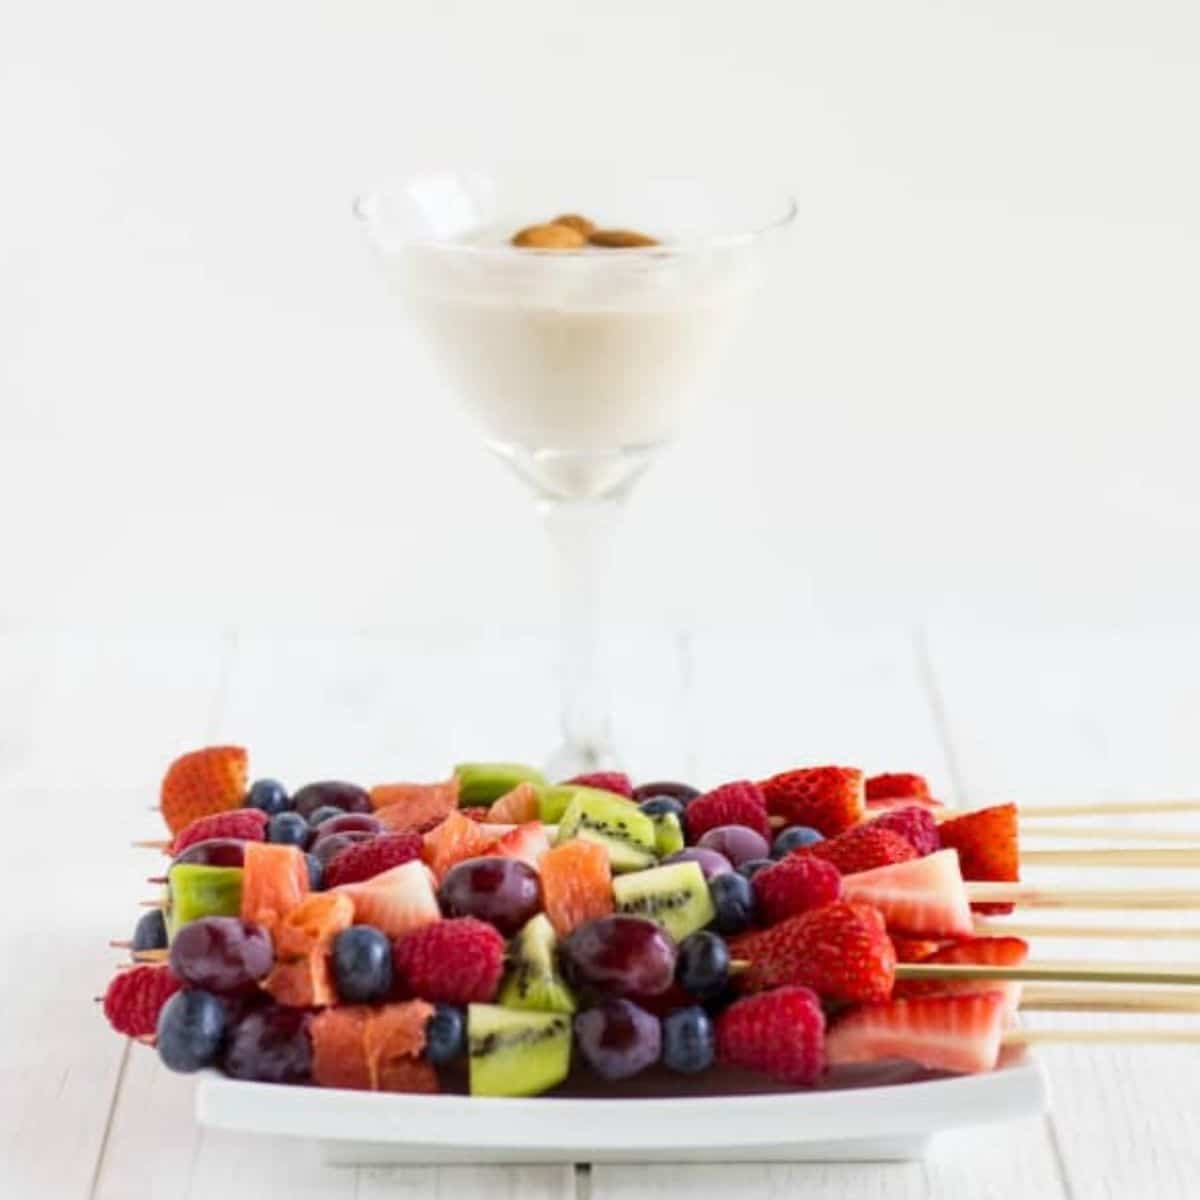 Fruit kabobs on white plate with almind milk cream in glass